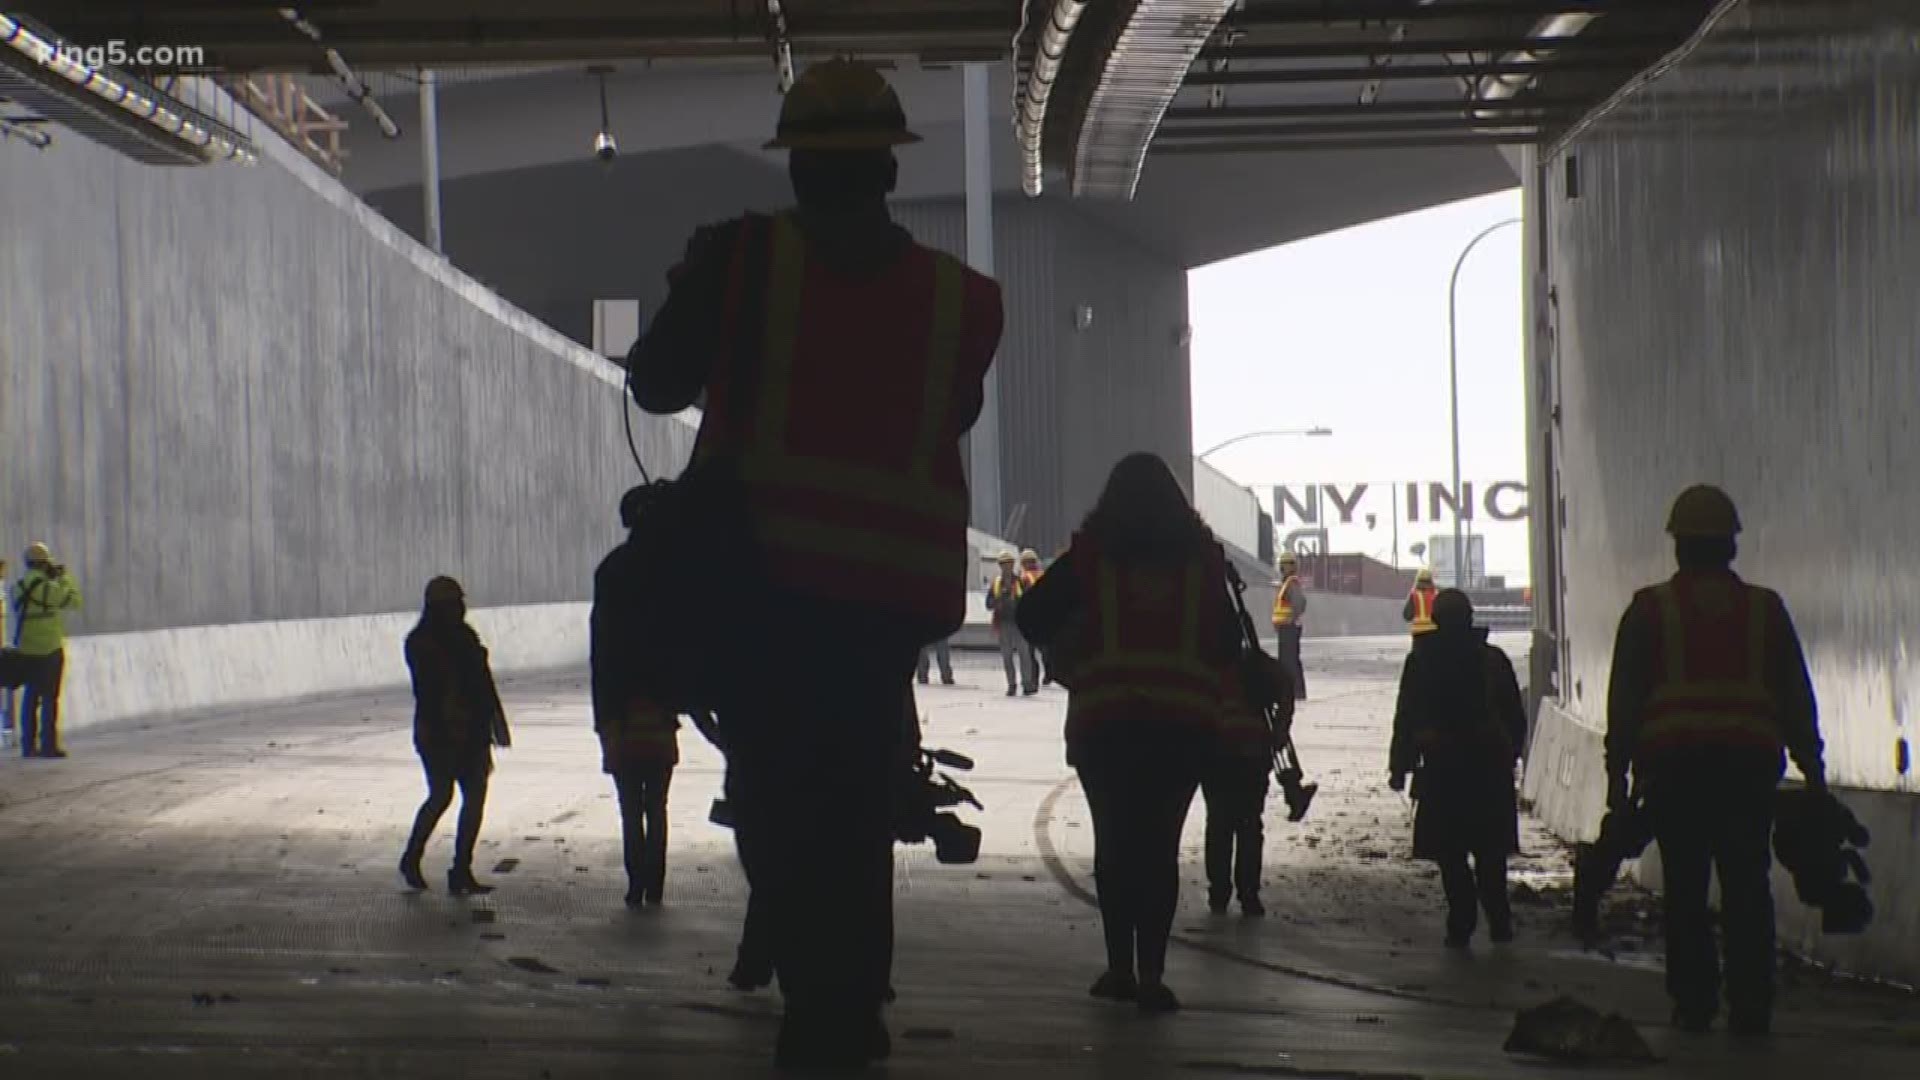 KING 5's Cam Johnson looks into what crews will be doing during the three week closure of 99 before the tunnel opening.